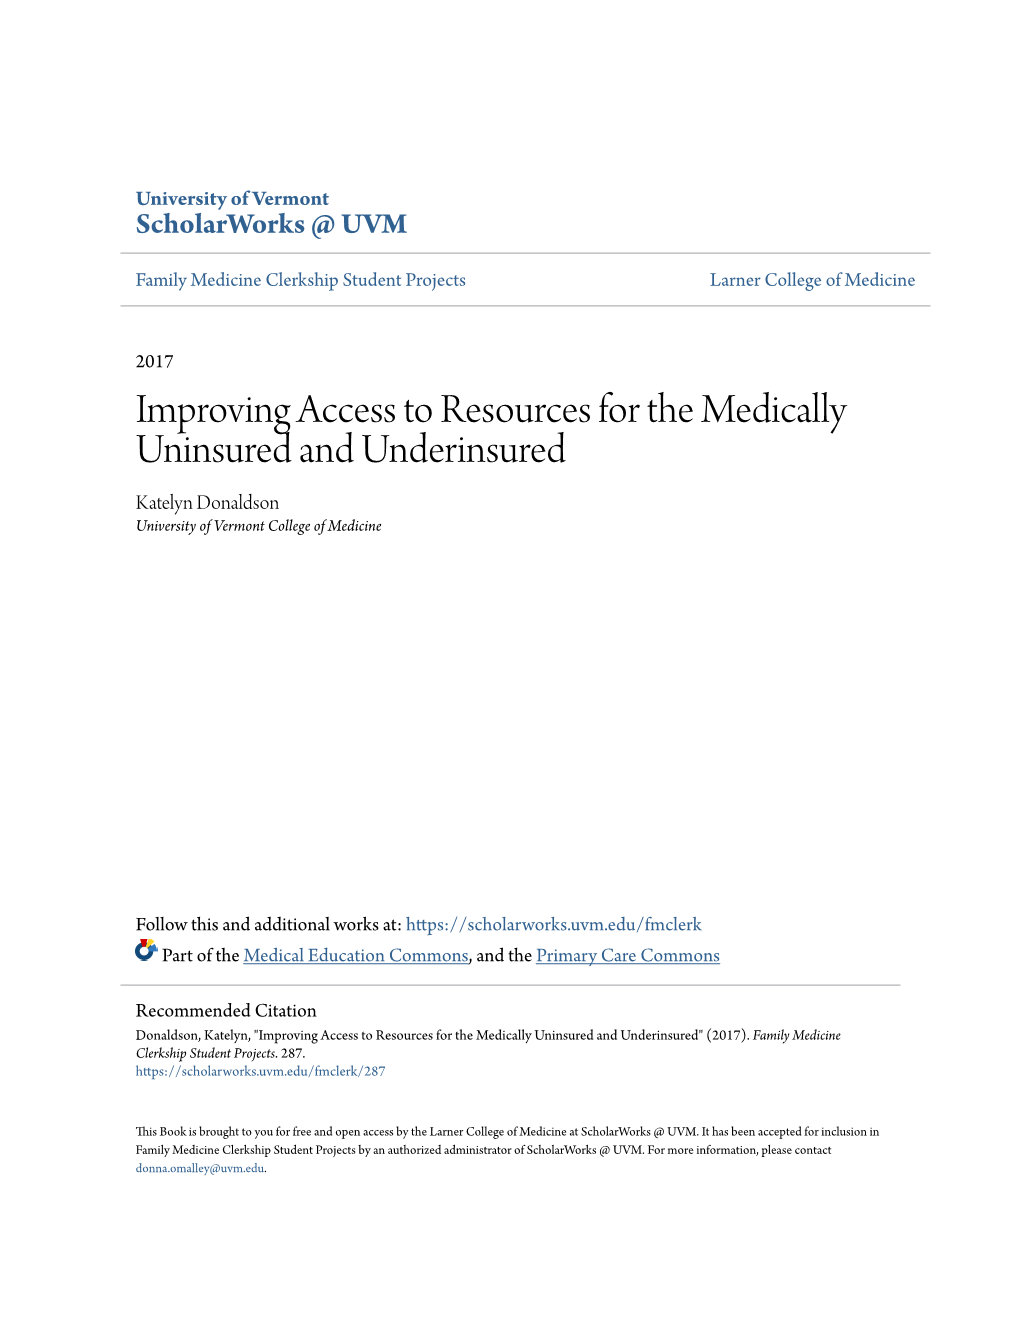 Improving Access to Resources for the Medically Uninsured and Underinsured Katelyn Donaldson University of Vermont College of Medicine